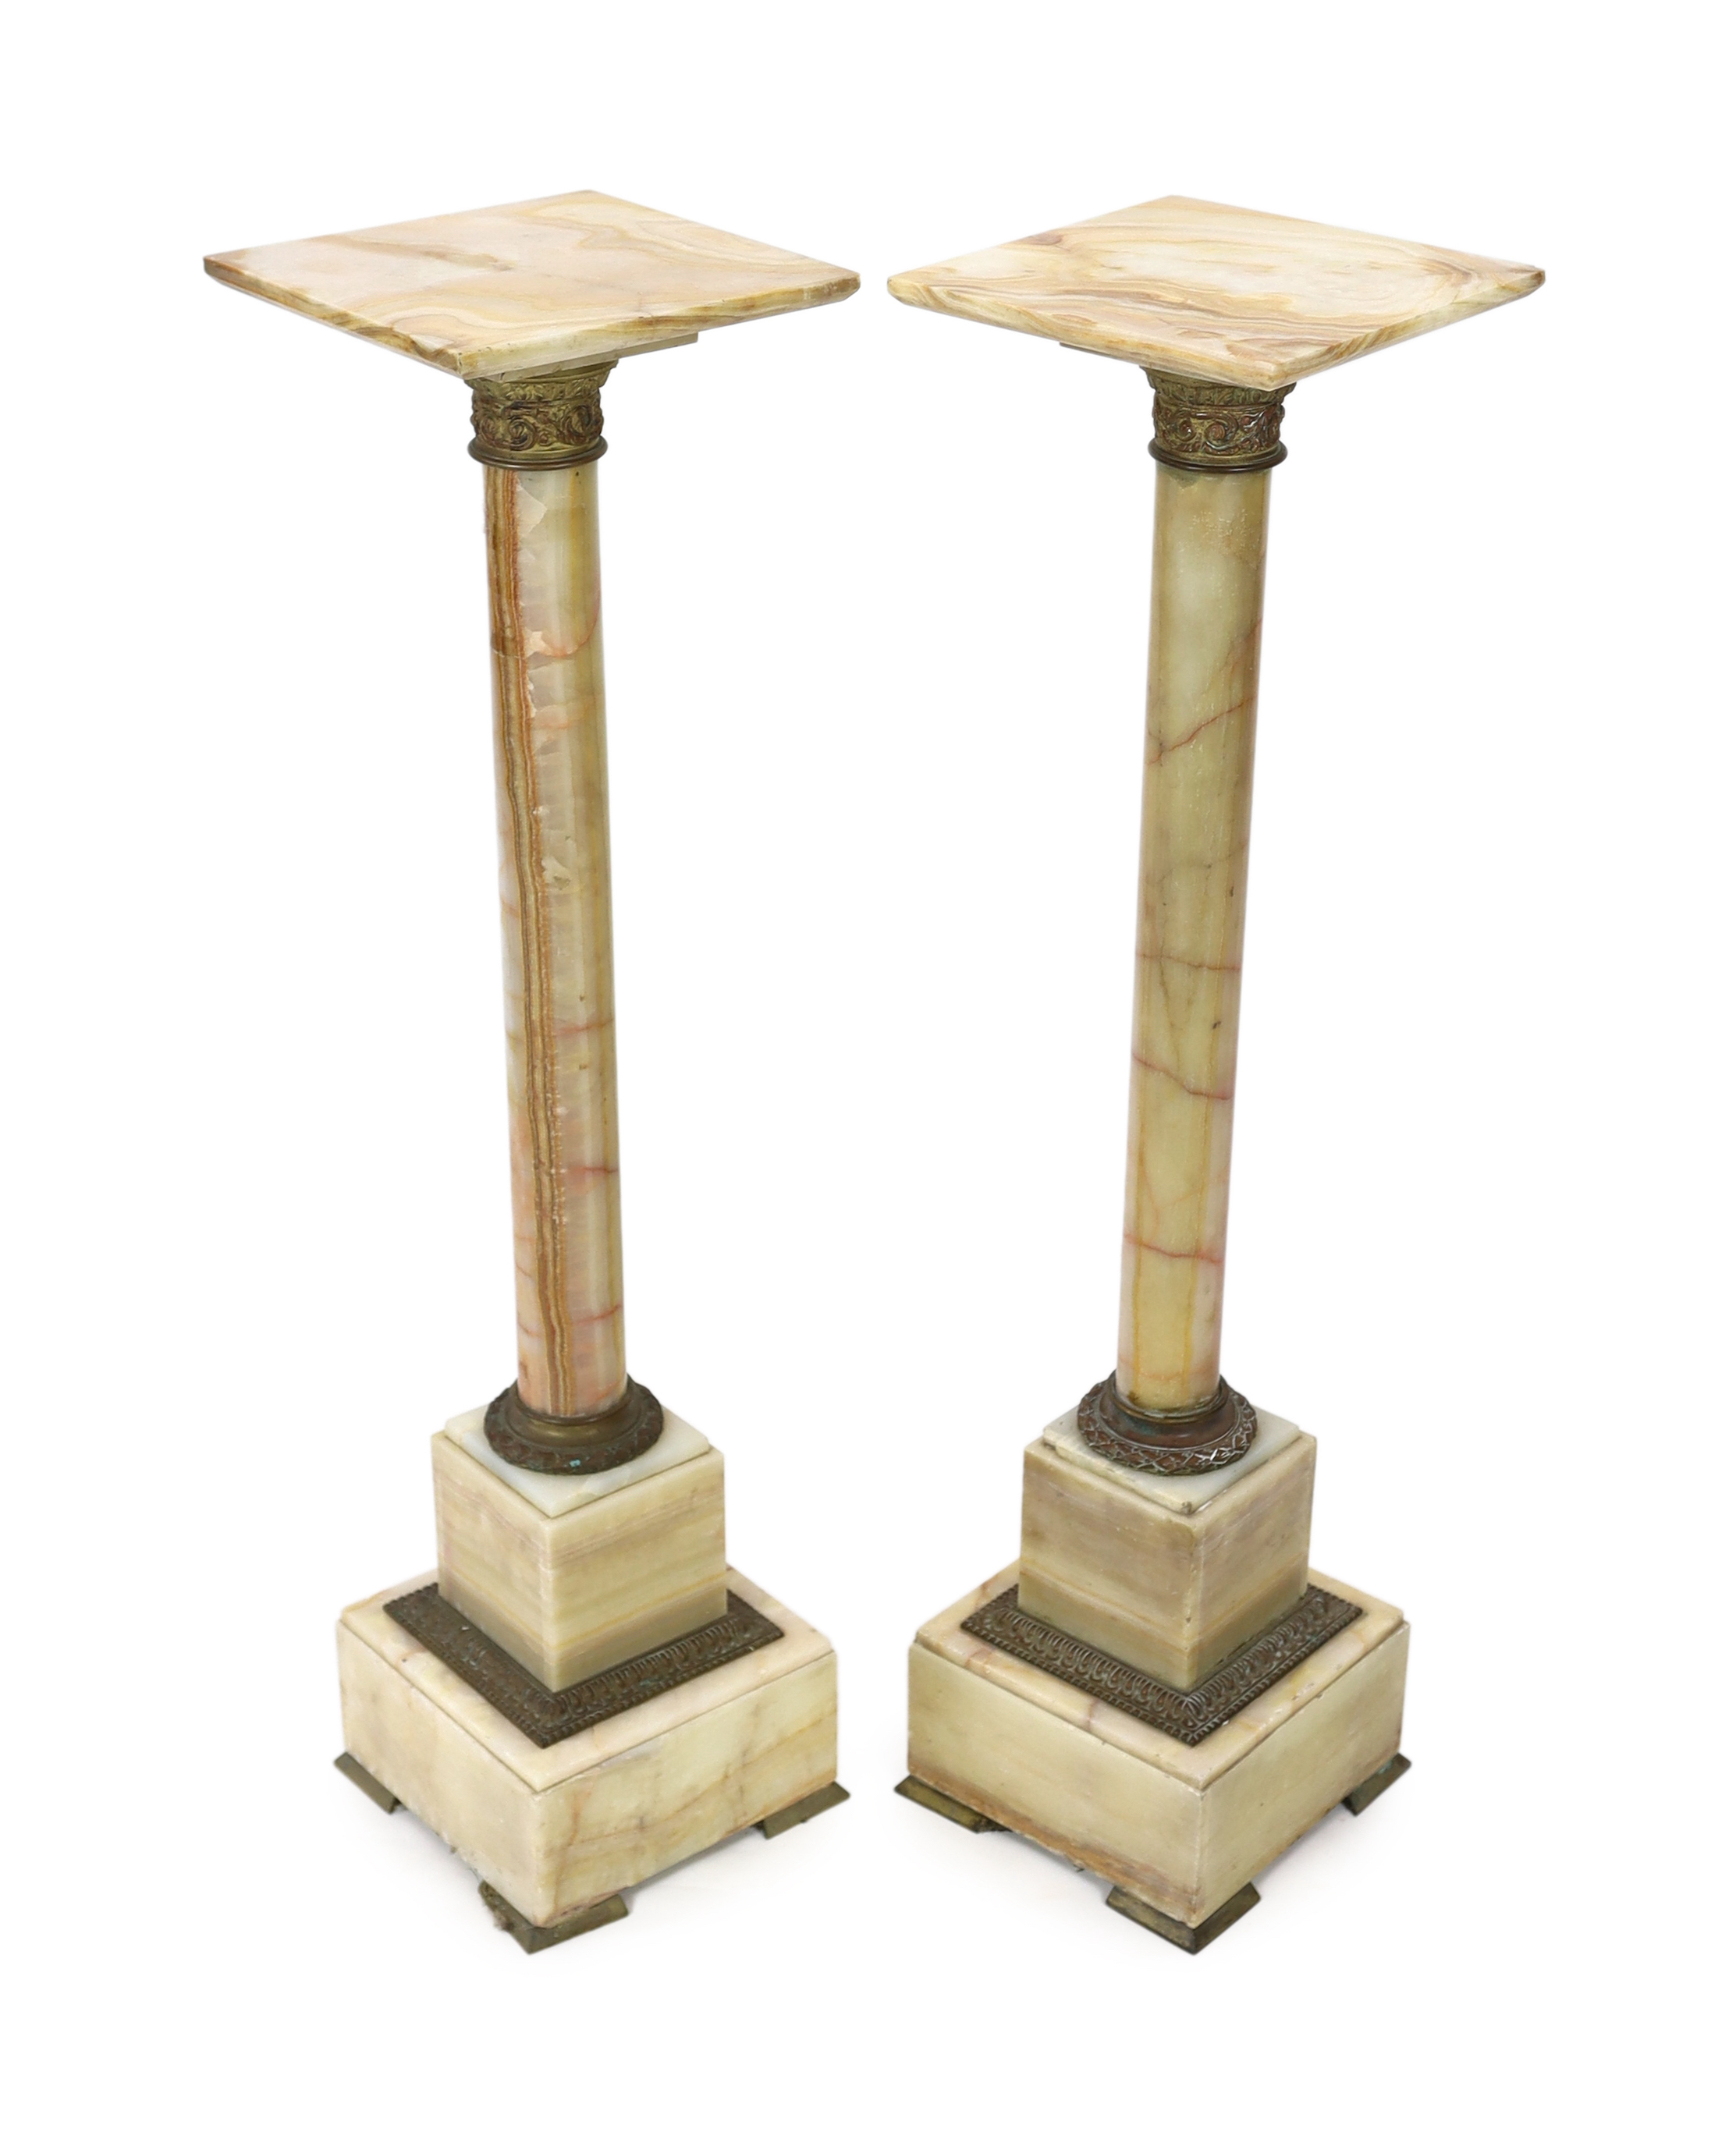 A pair of early 20th century French ormolu mounted onyx pedestals, width 25cm, height 99cm